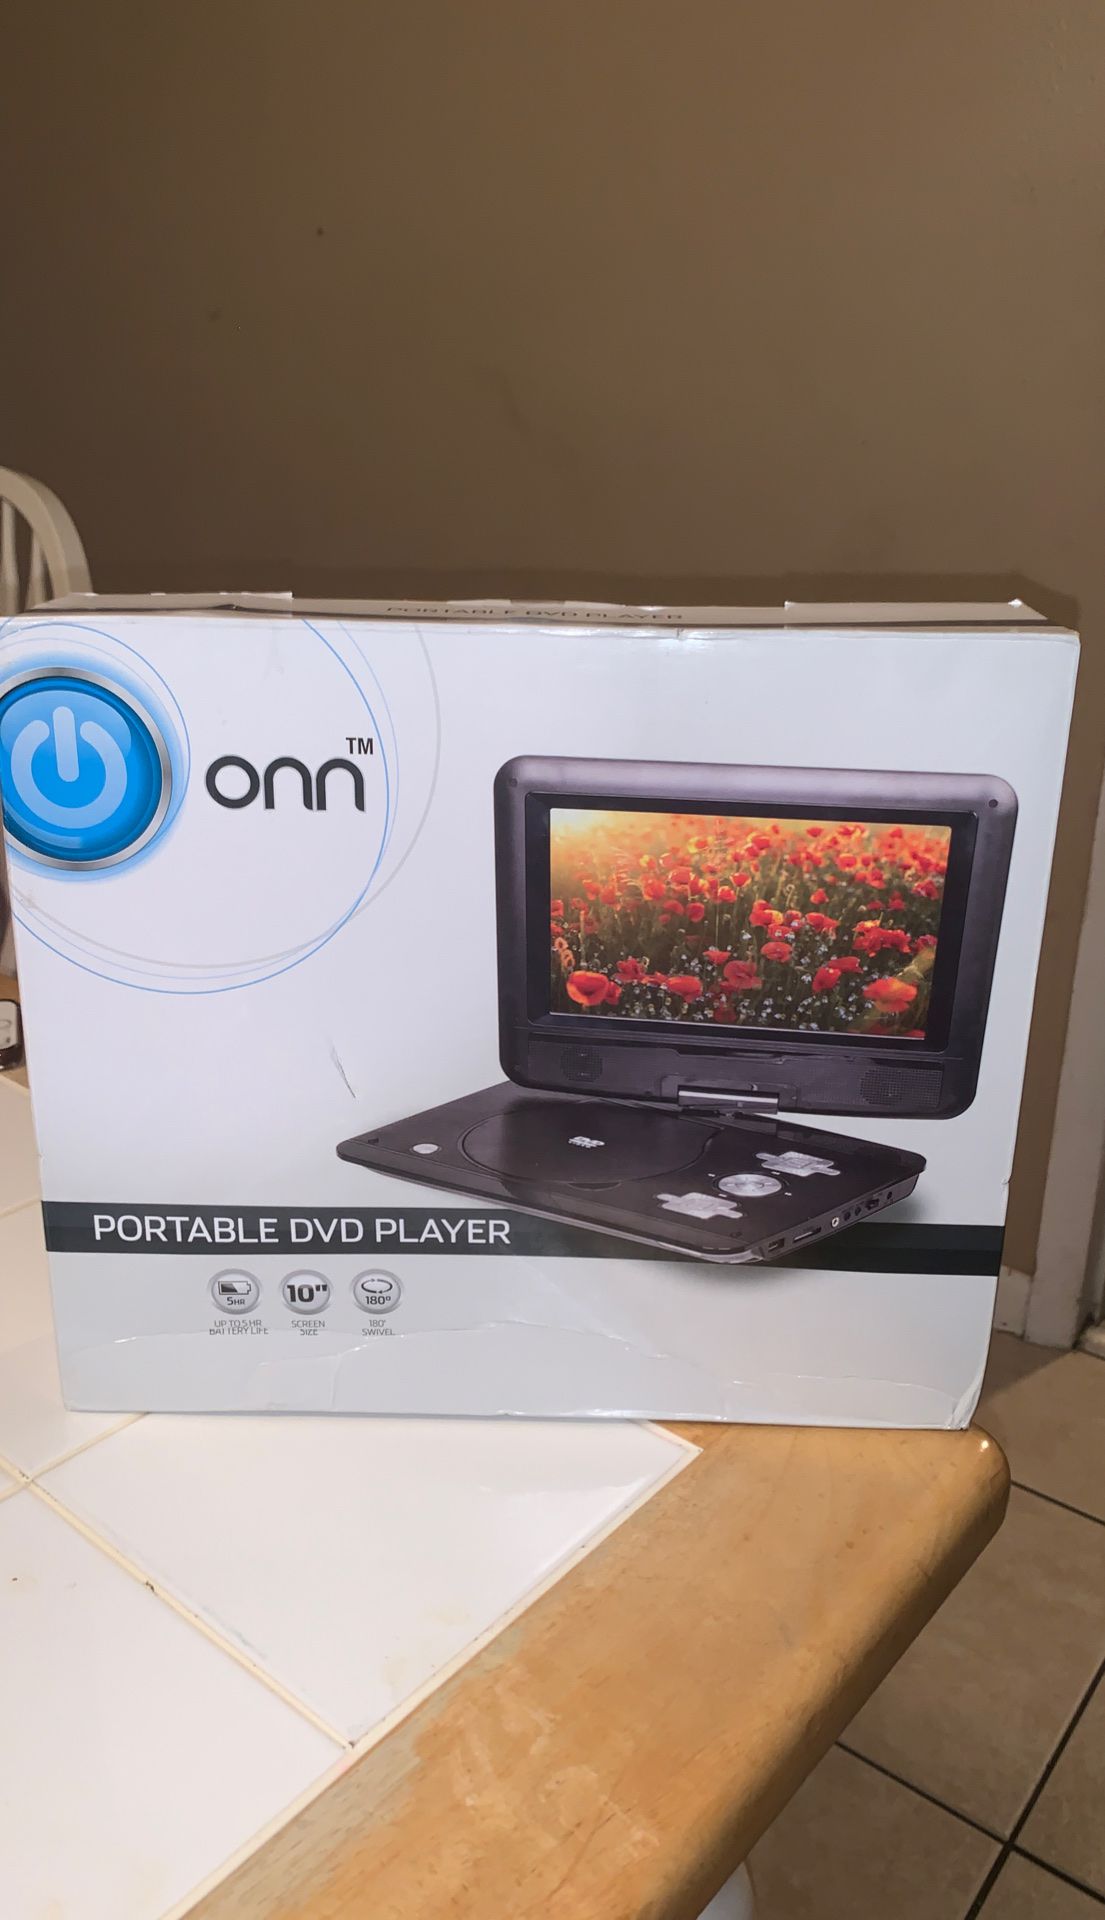 PORTABLE DVD PLAYER (NEW, NEVER USED)